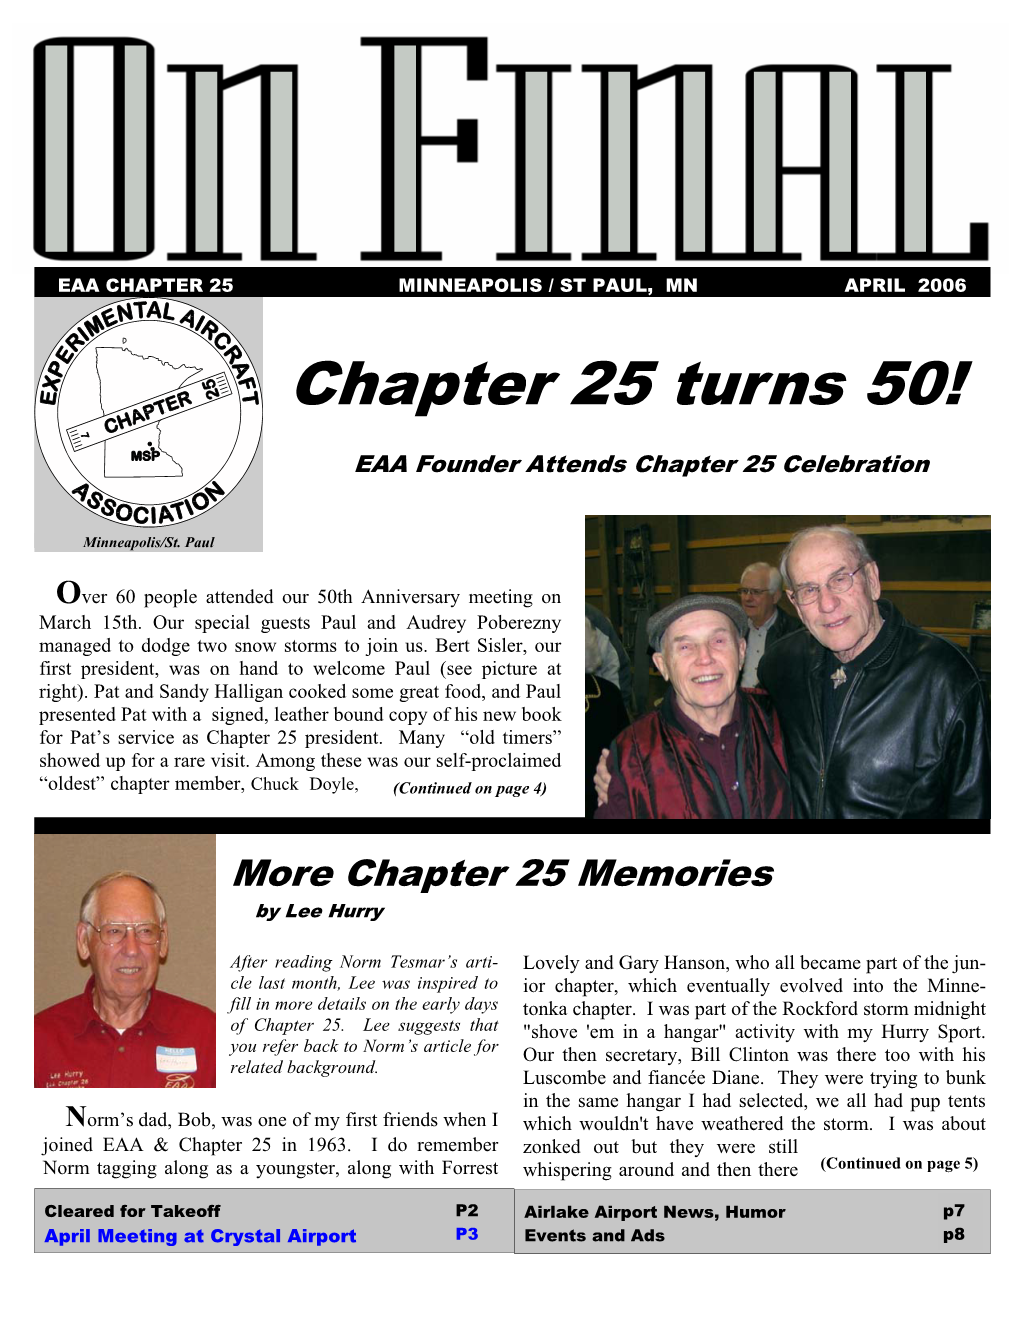 Chapter 25 Turns 50!